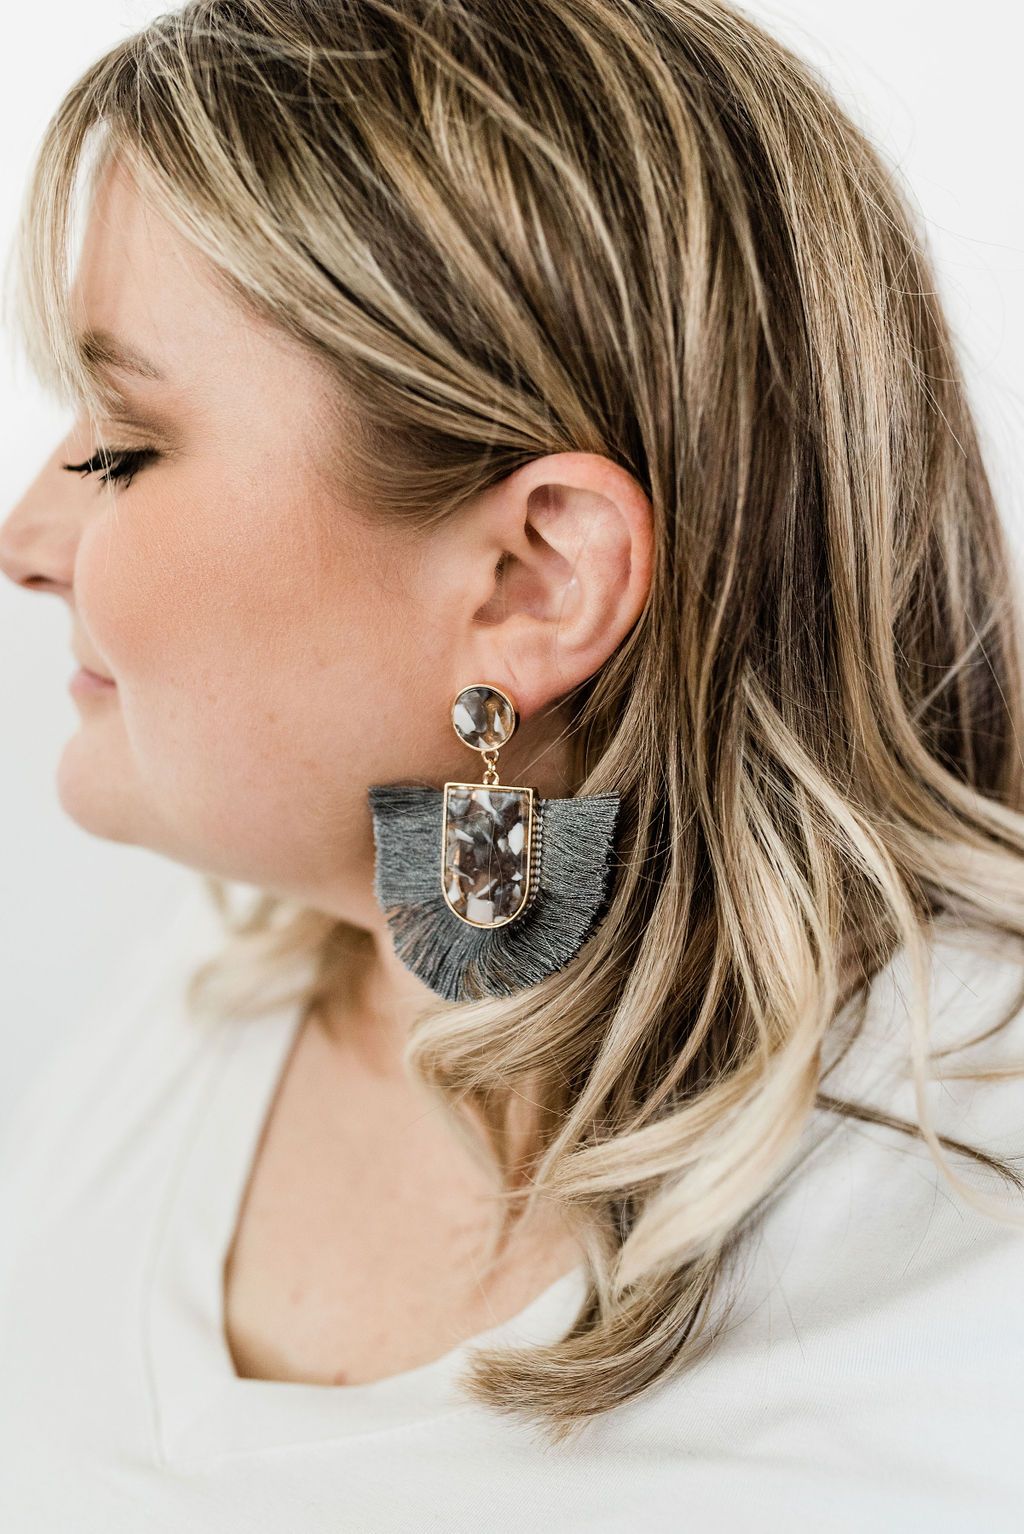 Grey Tassel and Acetate Earrings - Boutique 1780